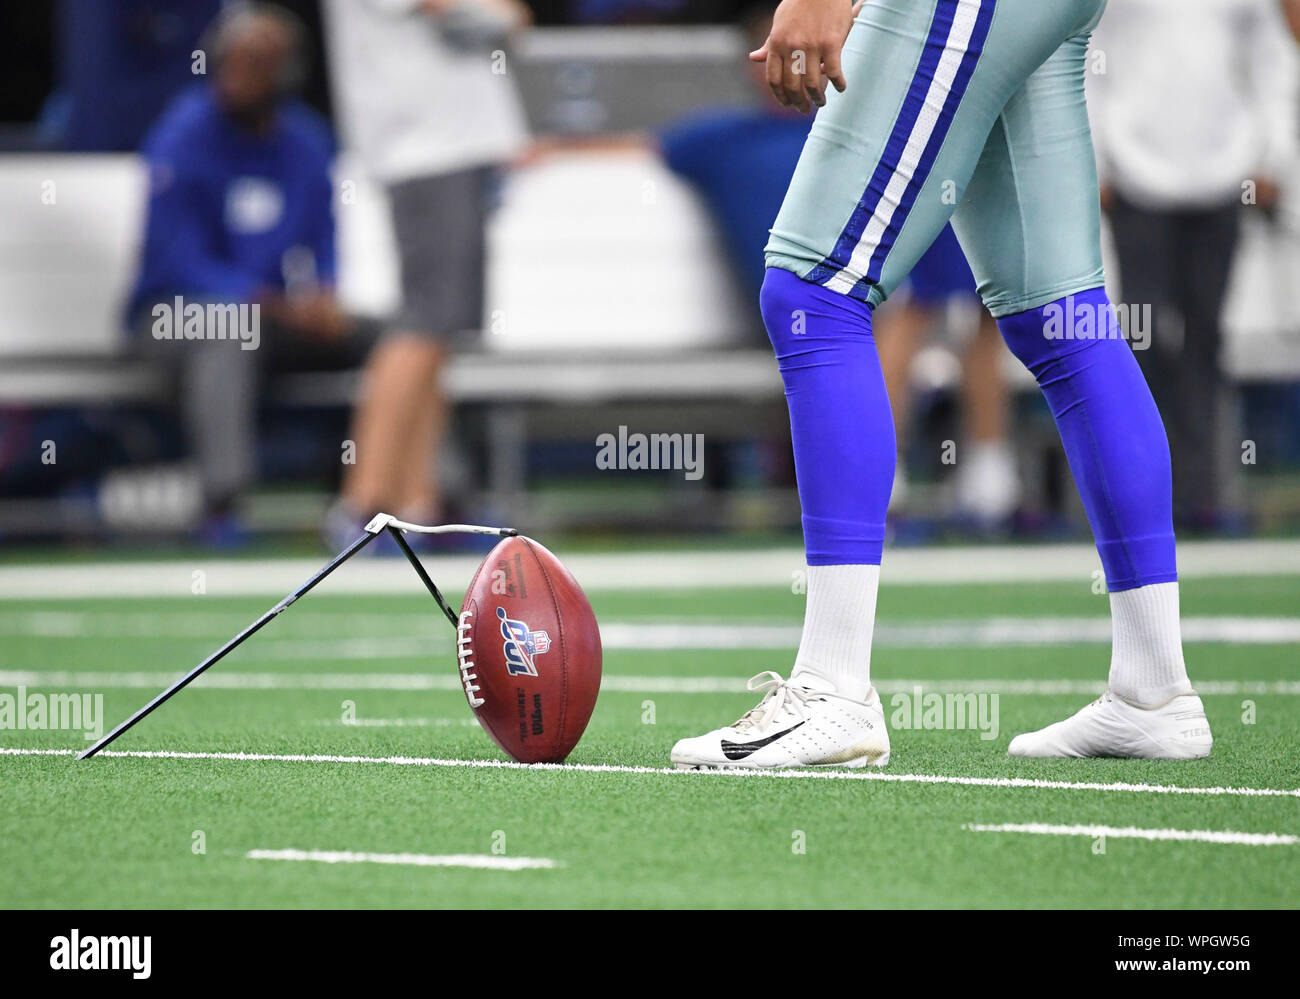 Sep 08, 2019: Dallas Cowboys place kicker Chris Maher sets up a 100th  anniversary NFL ball during pregame warmups beforean NFL game between the  New York Giants and the Dallas Cowboys at